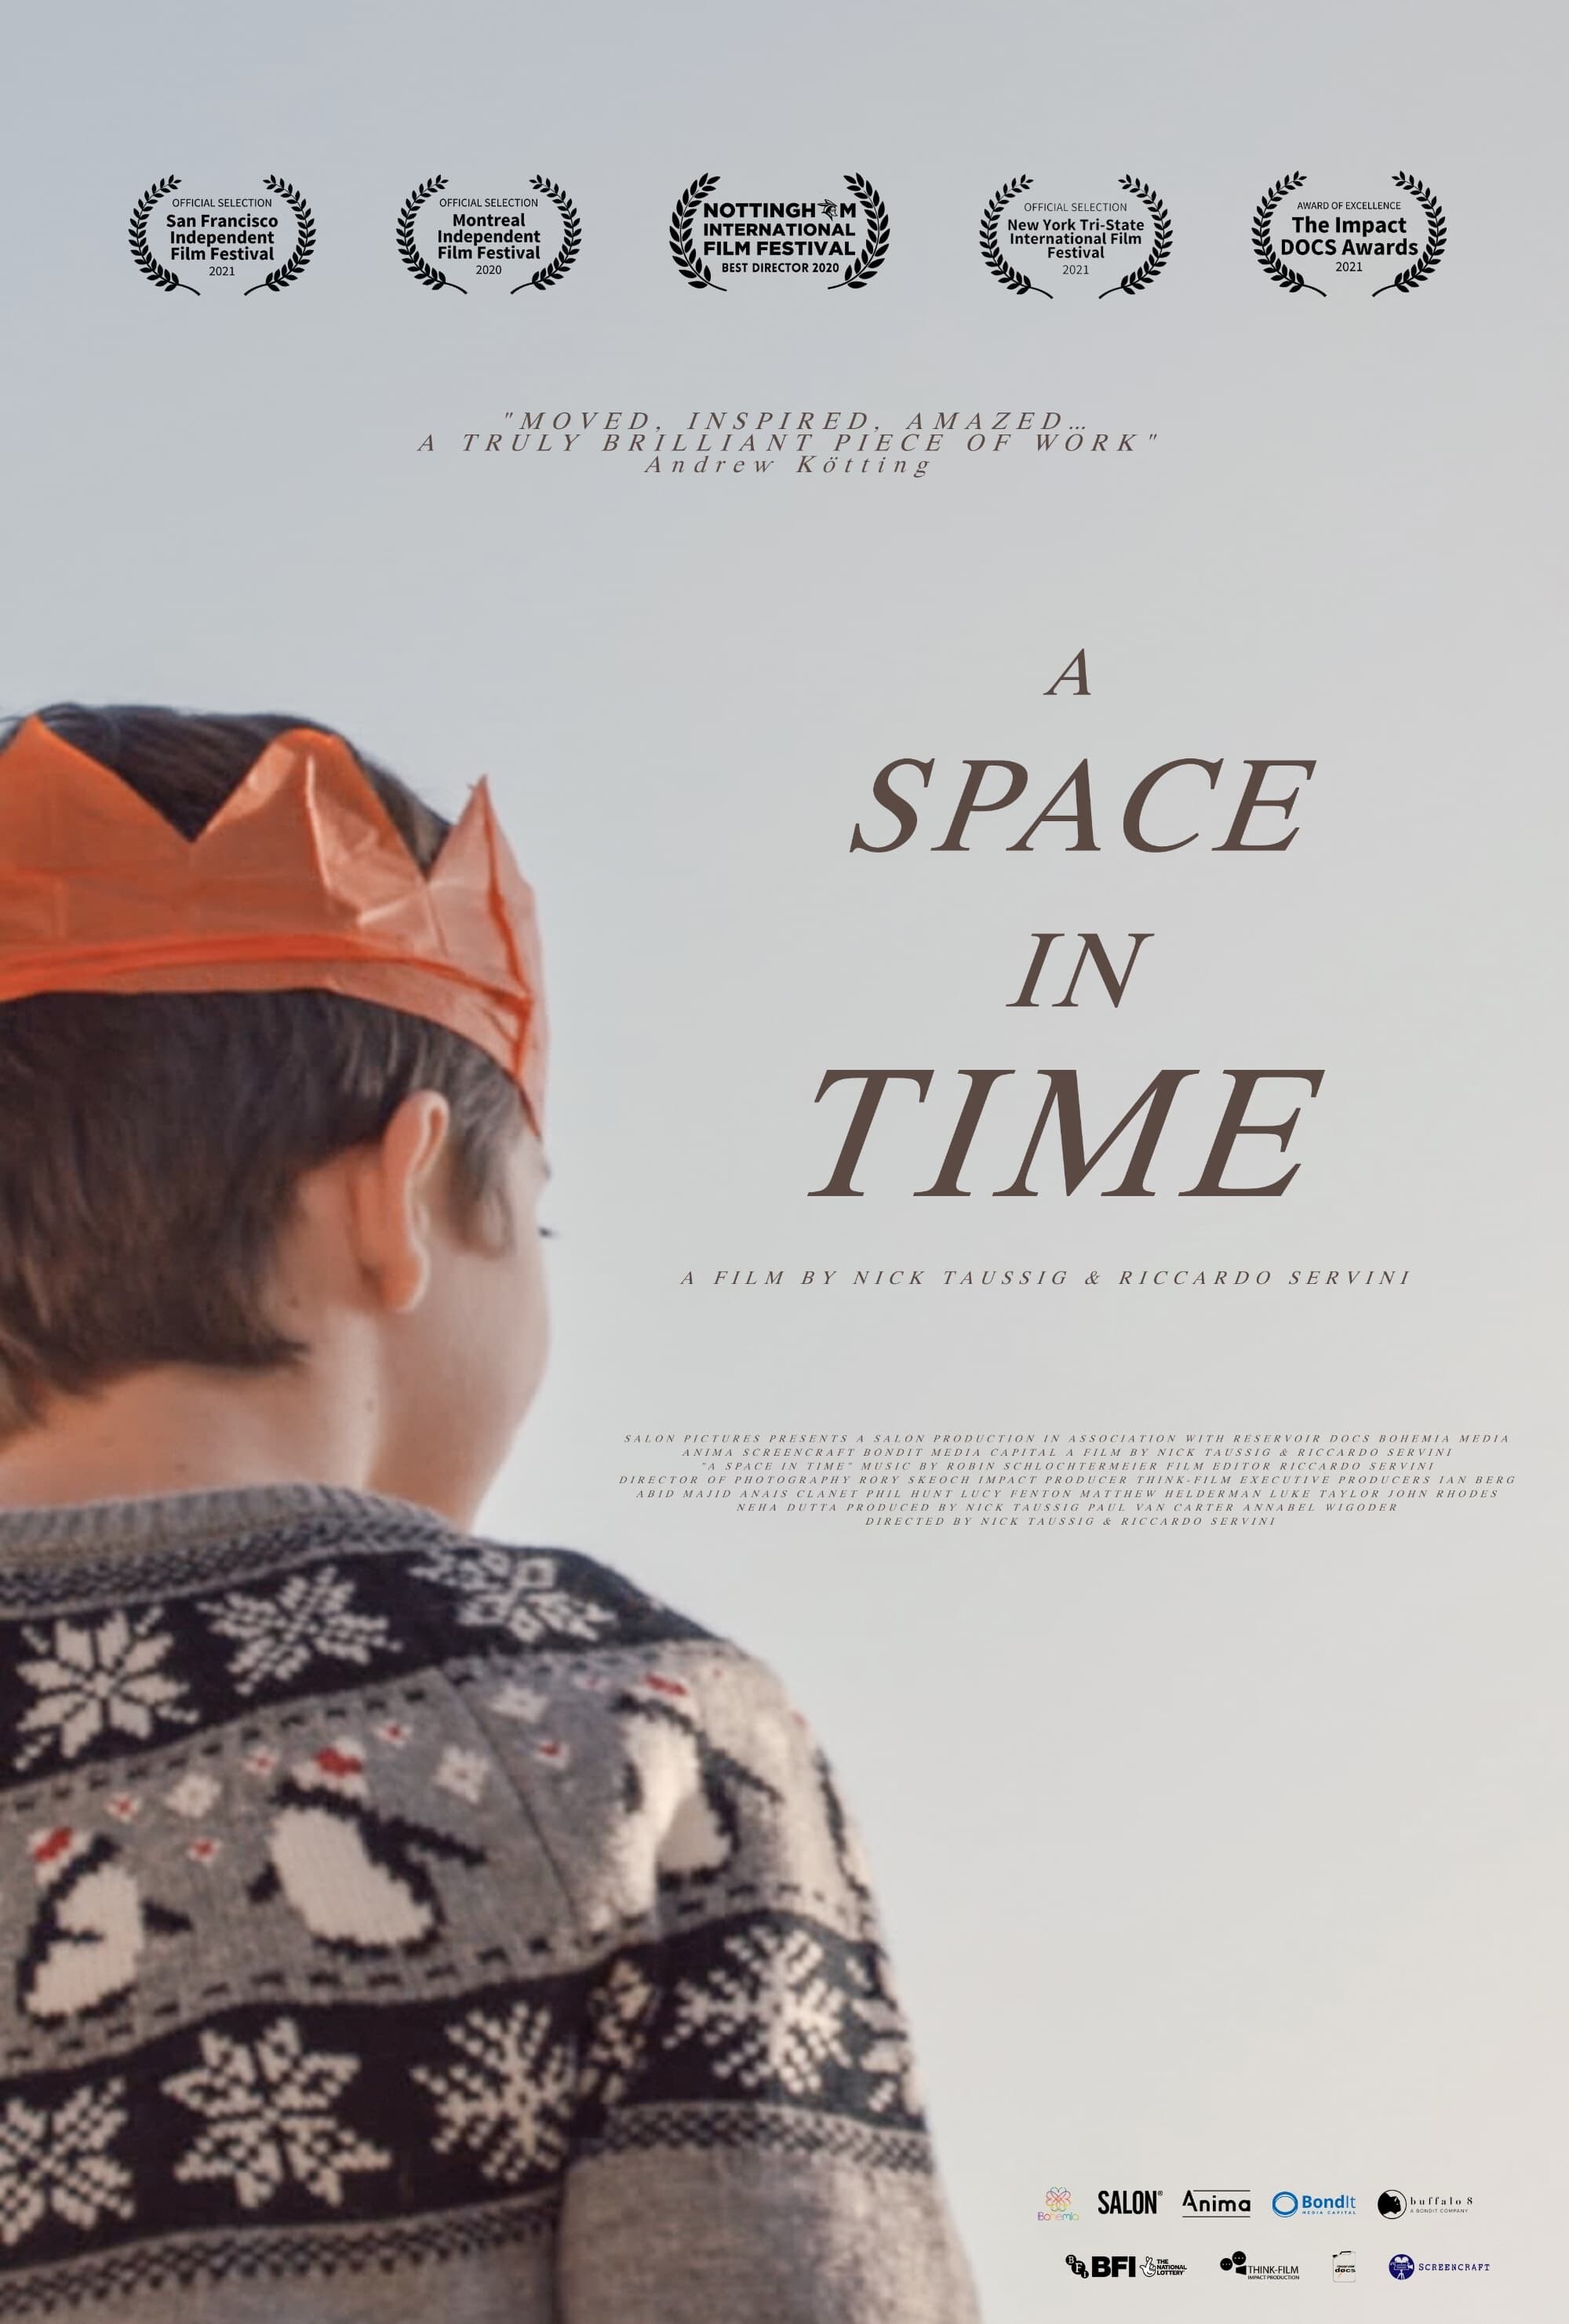 A Space in Time 2021 1080p AMZN WEB-DL DDP5 1 H 264-TEPES